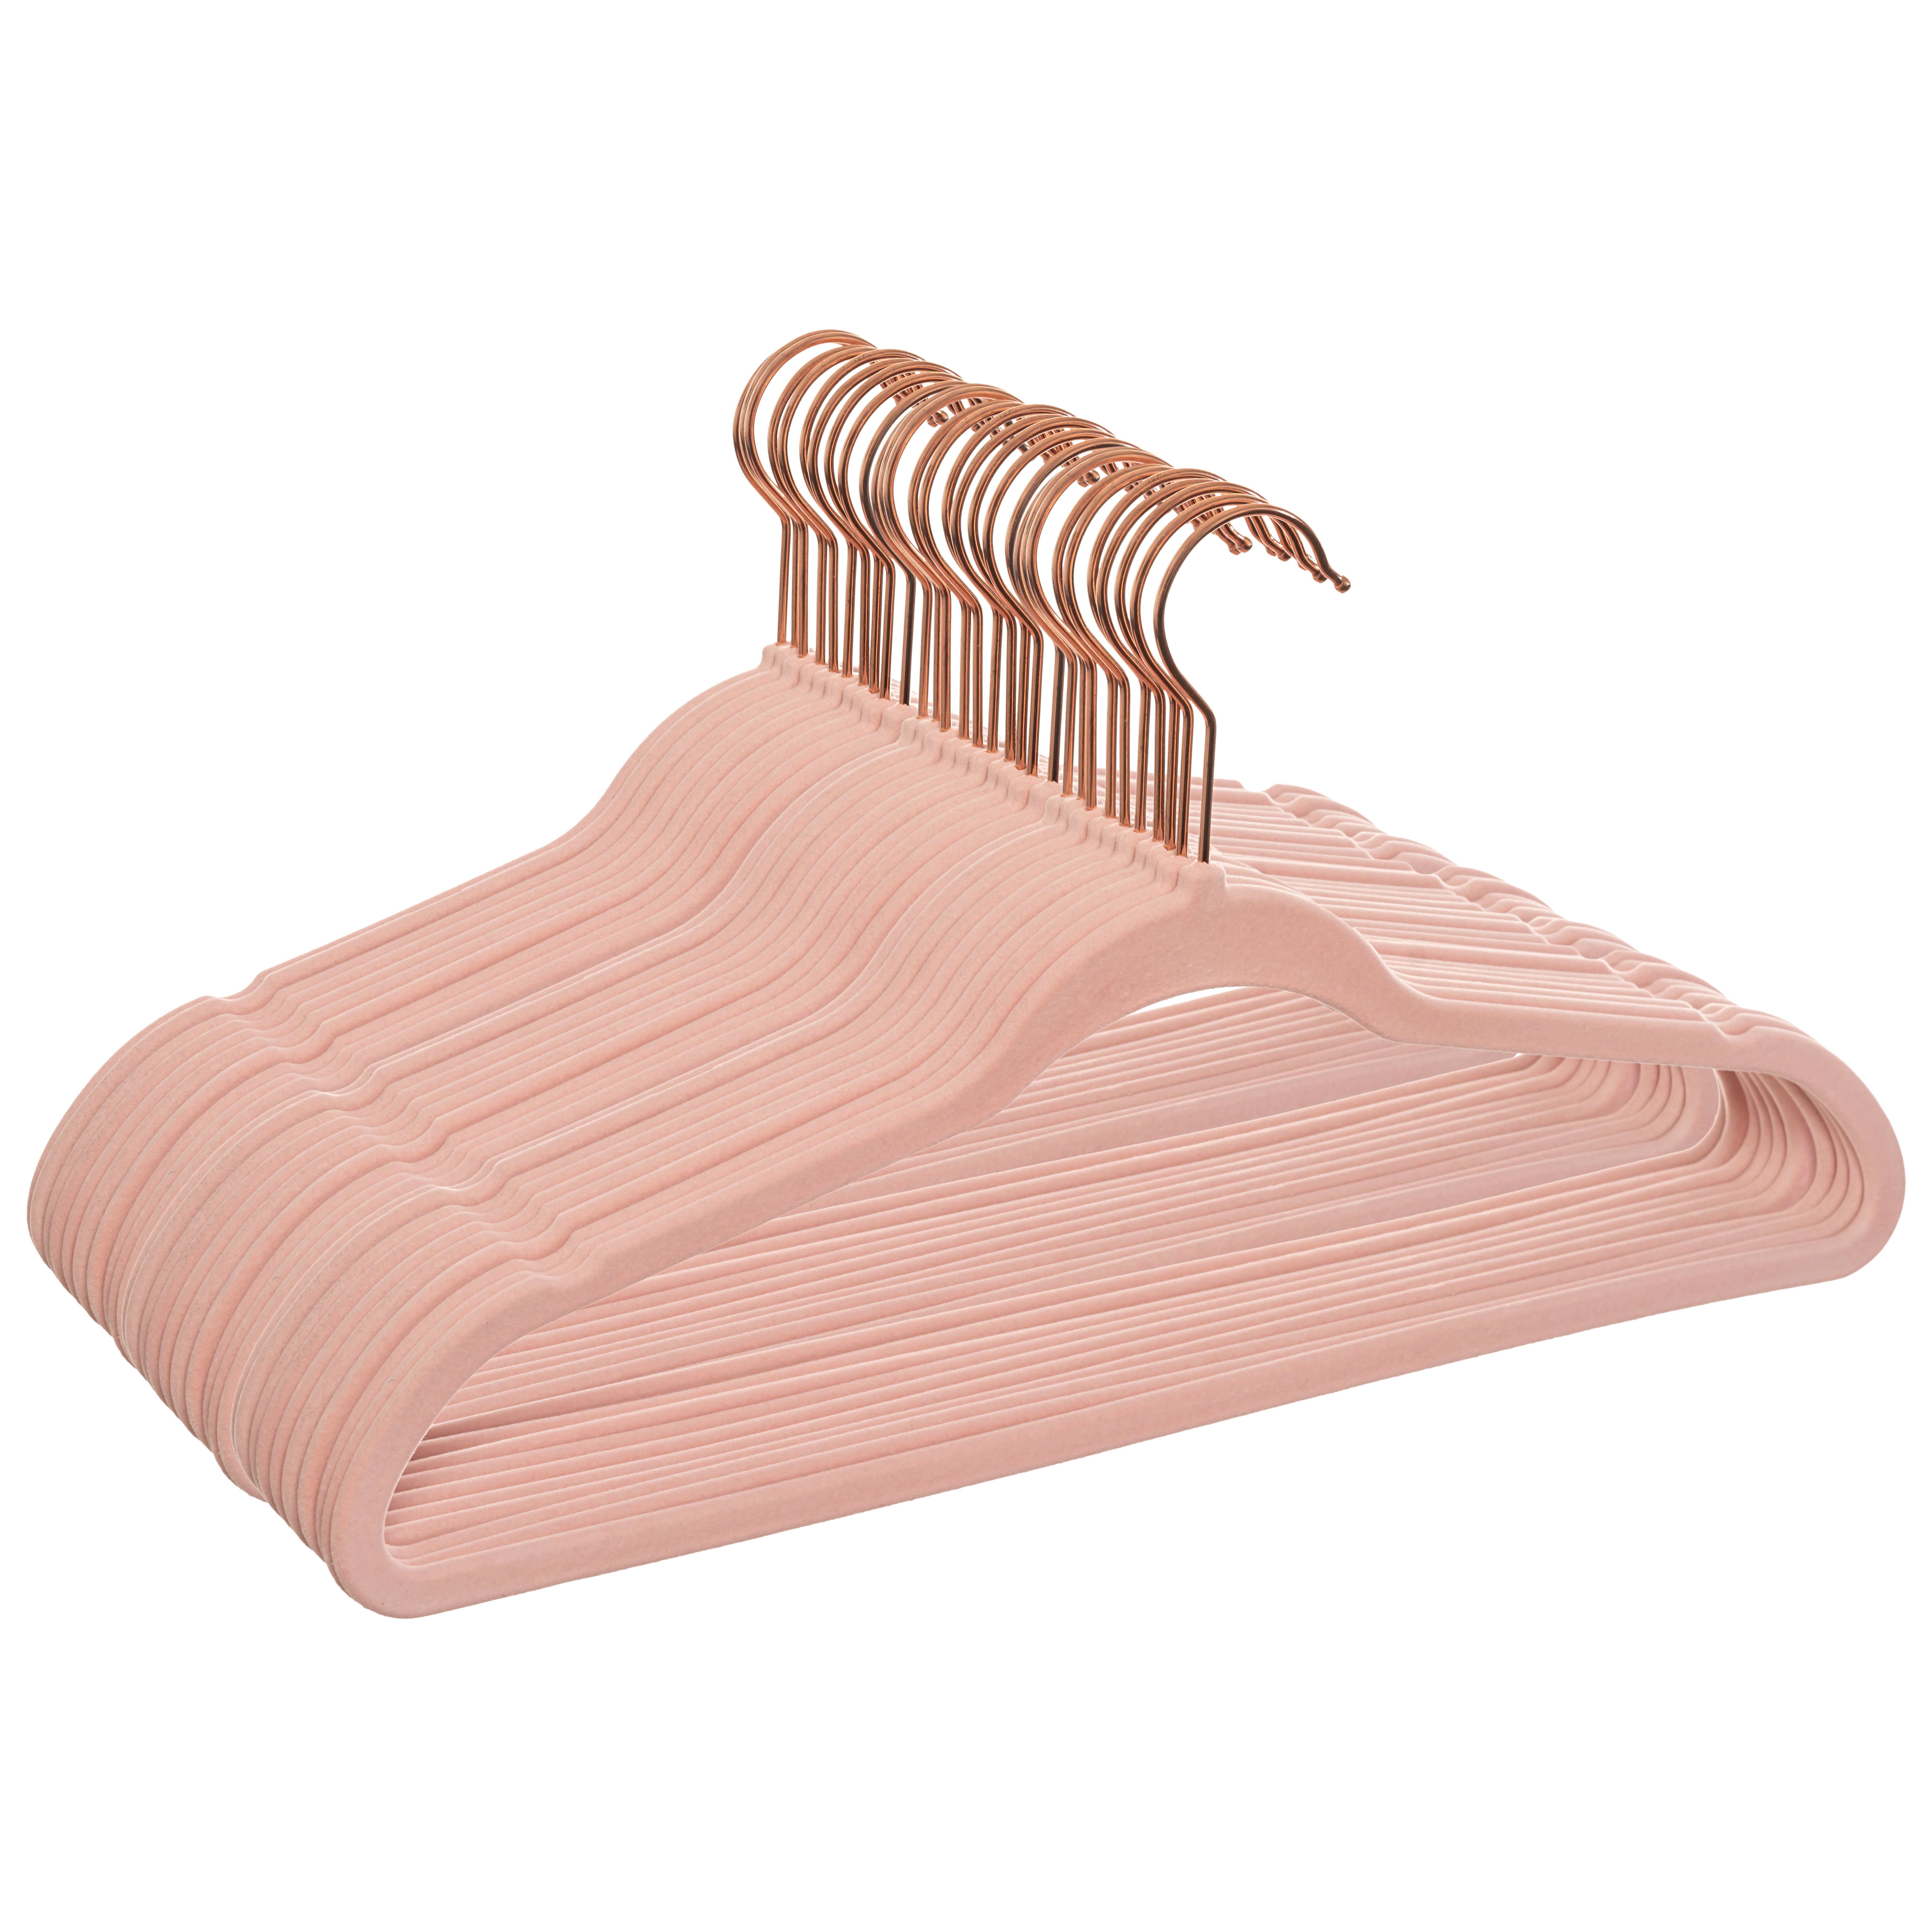 Plastic Hangers Durable Slim Stylish New in Pack of 30 & 150, Pink